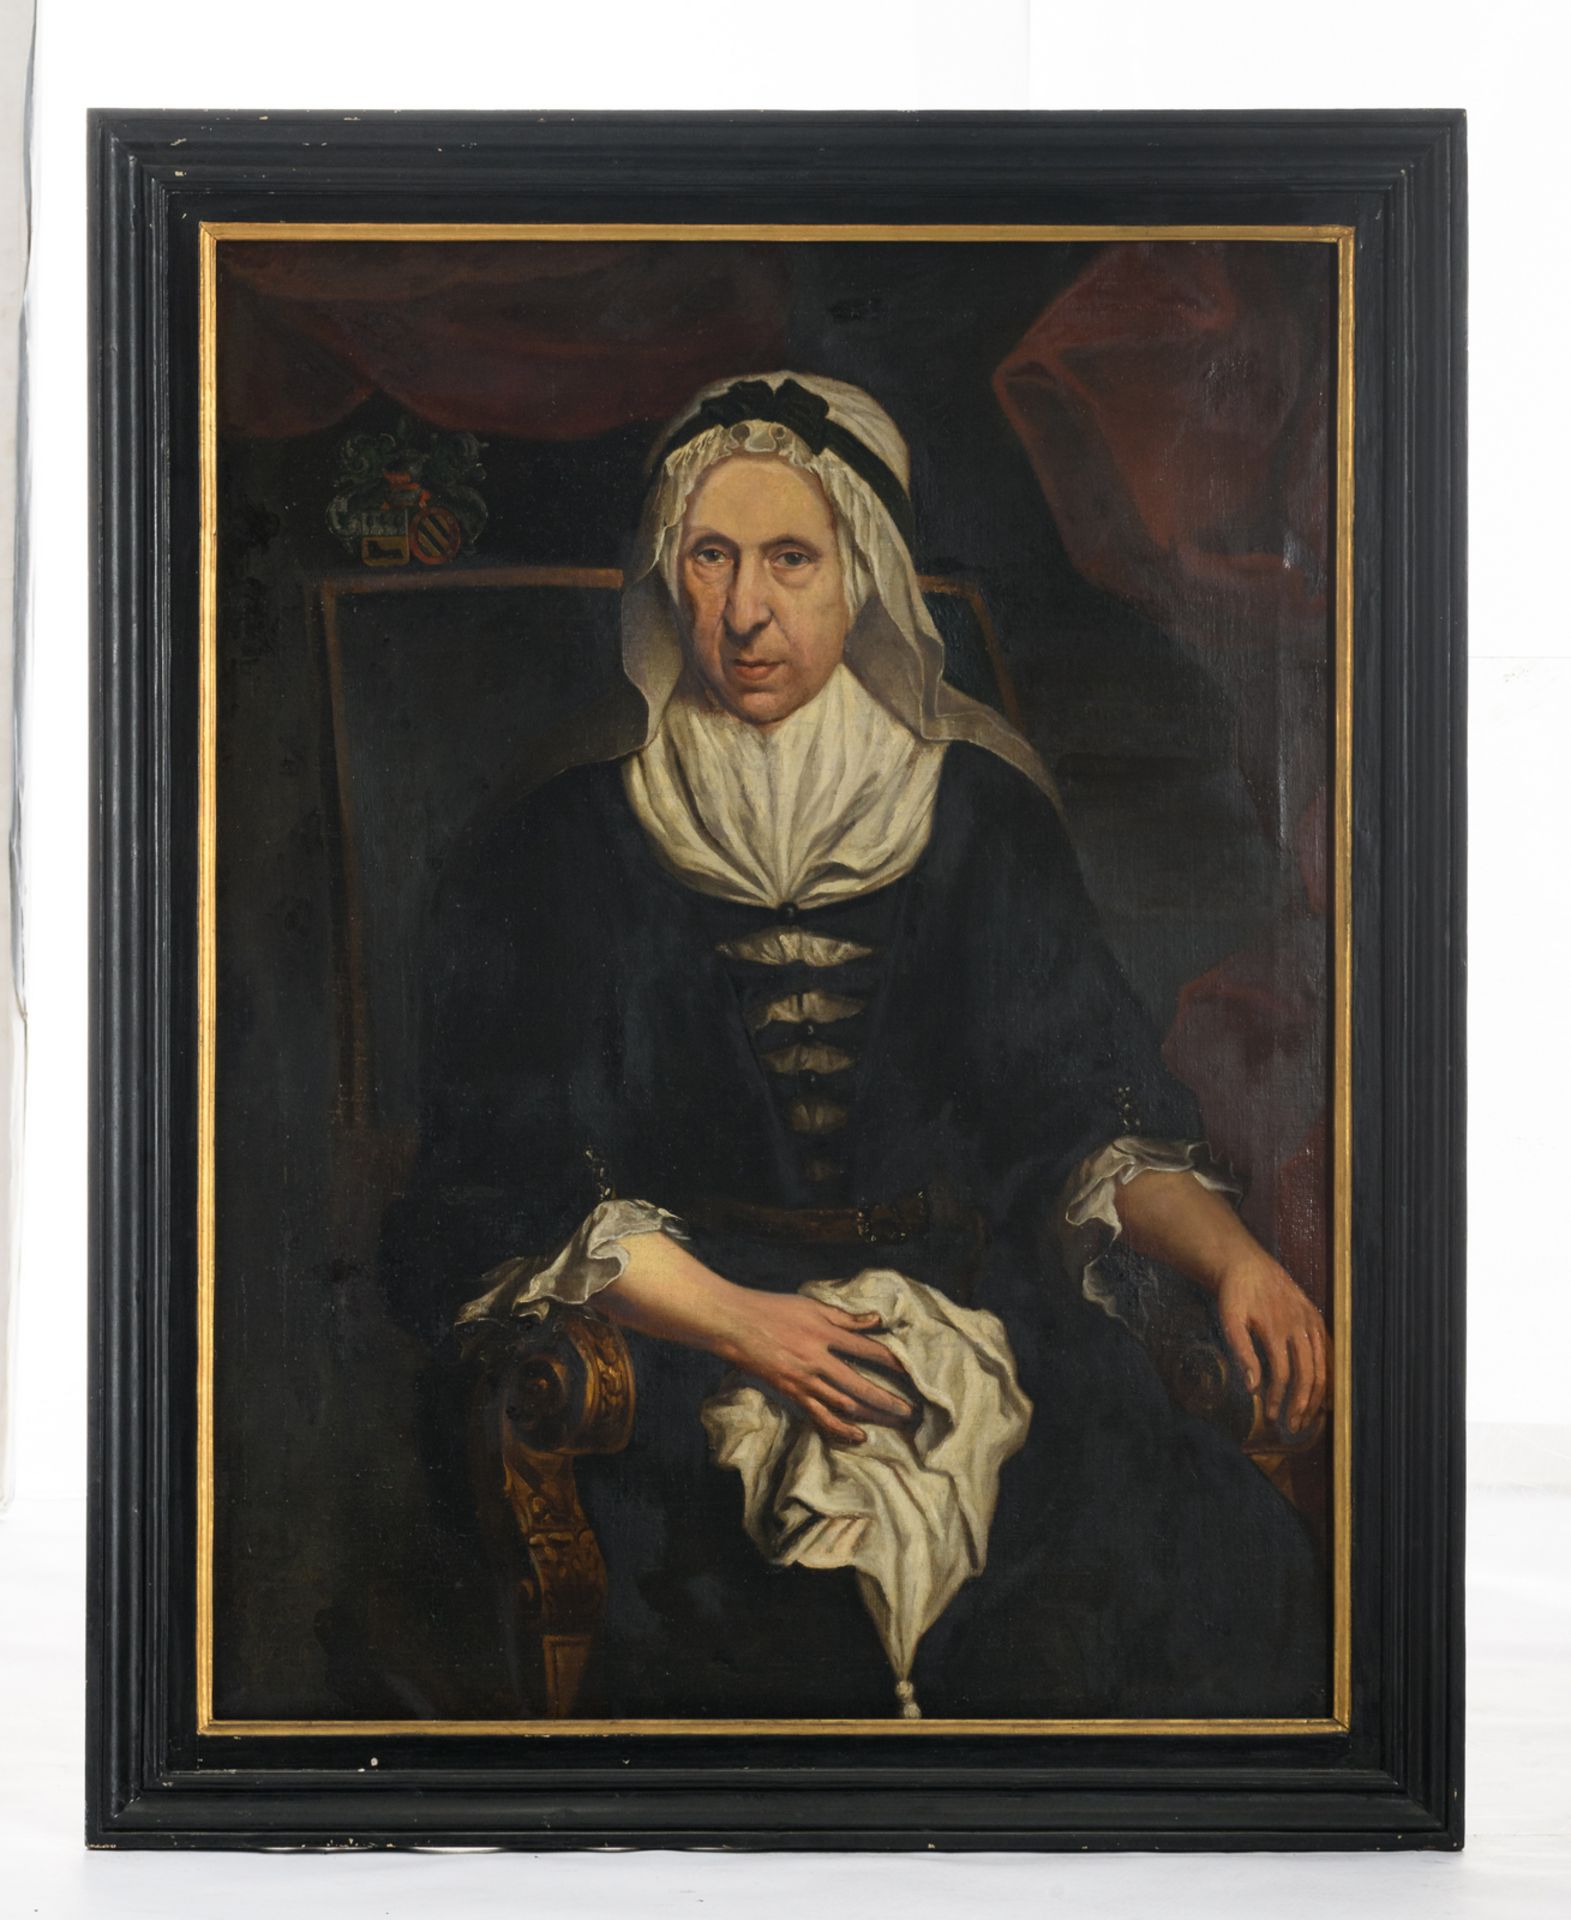 Unsigned, a portrait of the wife of A. Van der Vliet, oil on canvas, 18thC, 83 x 108 cm - Image 2 of 4